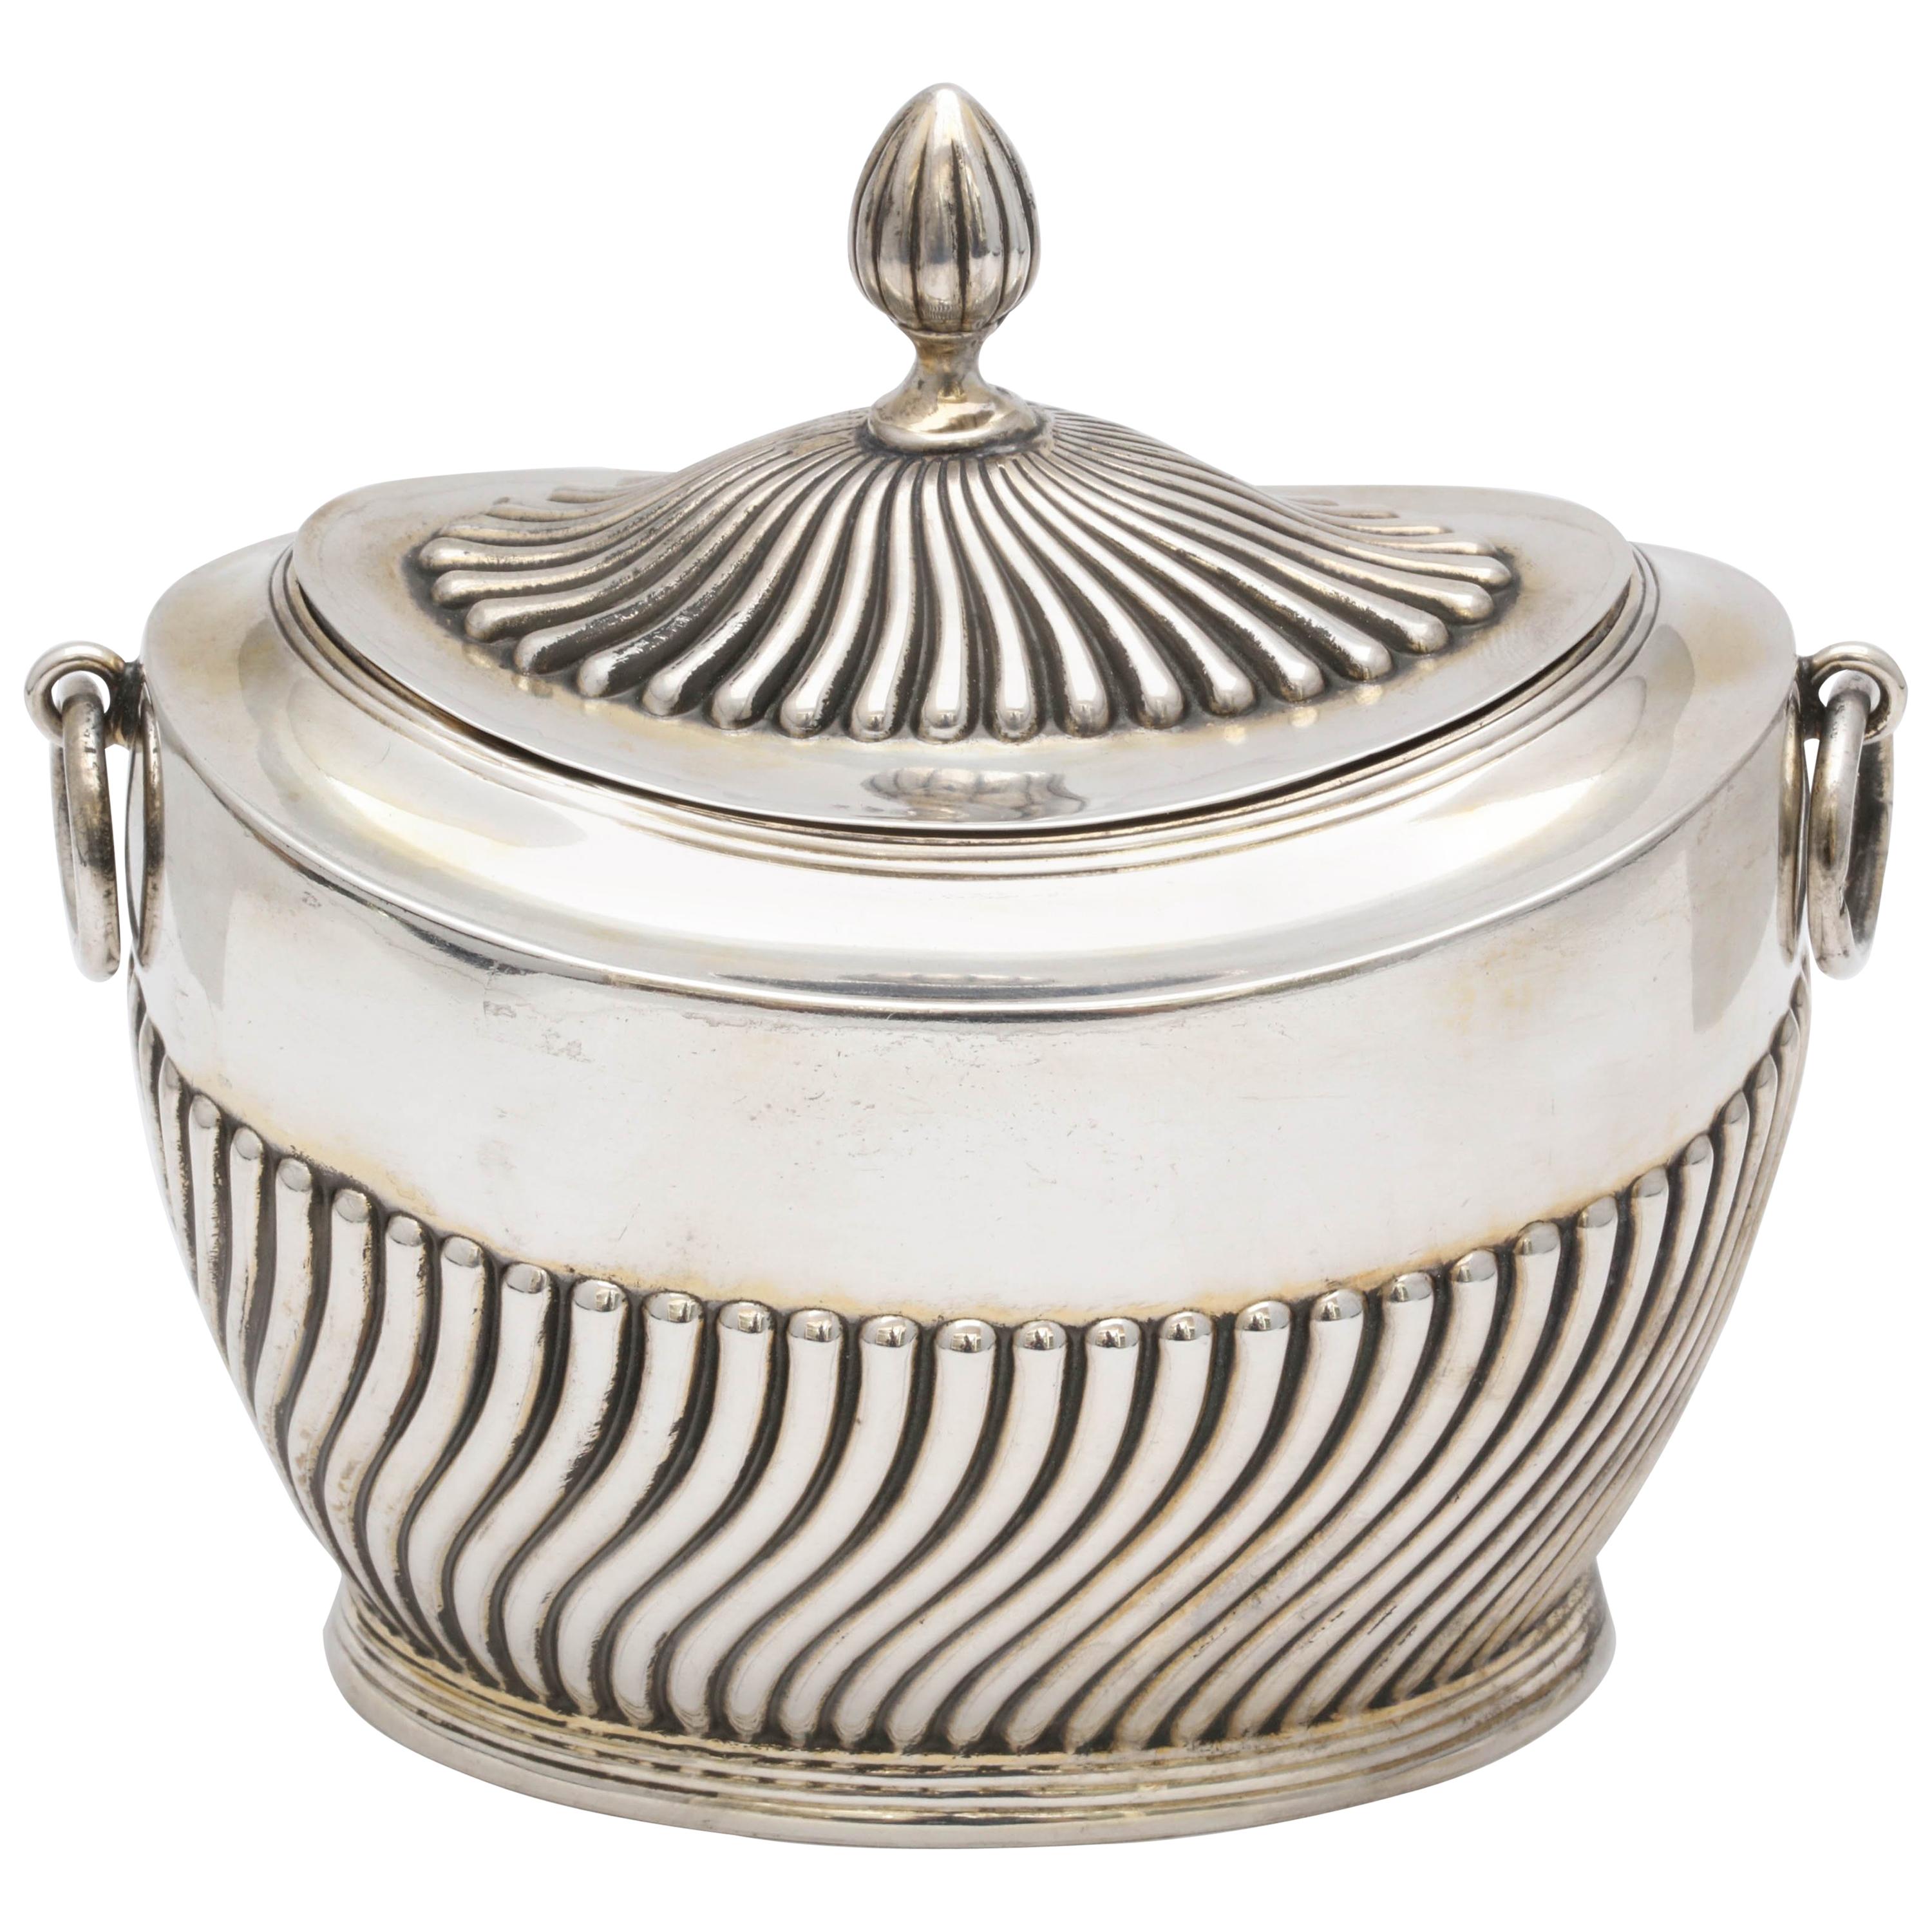 Edwardian Sterling Silver Neoclassical Style Tea Caddy with Hinged Lid